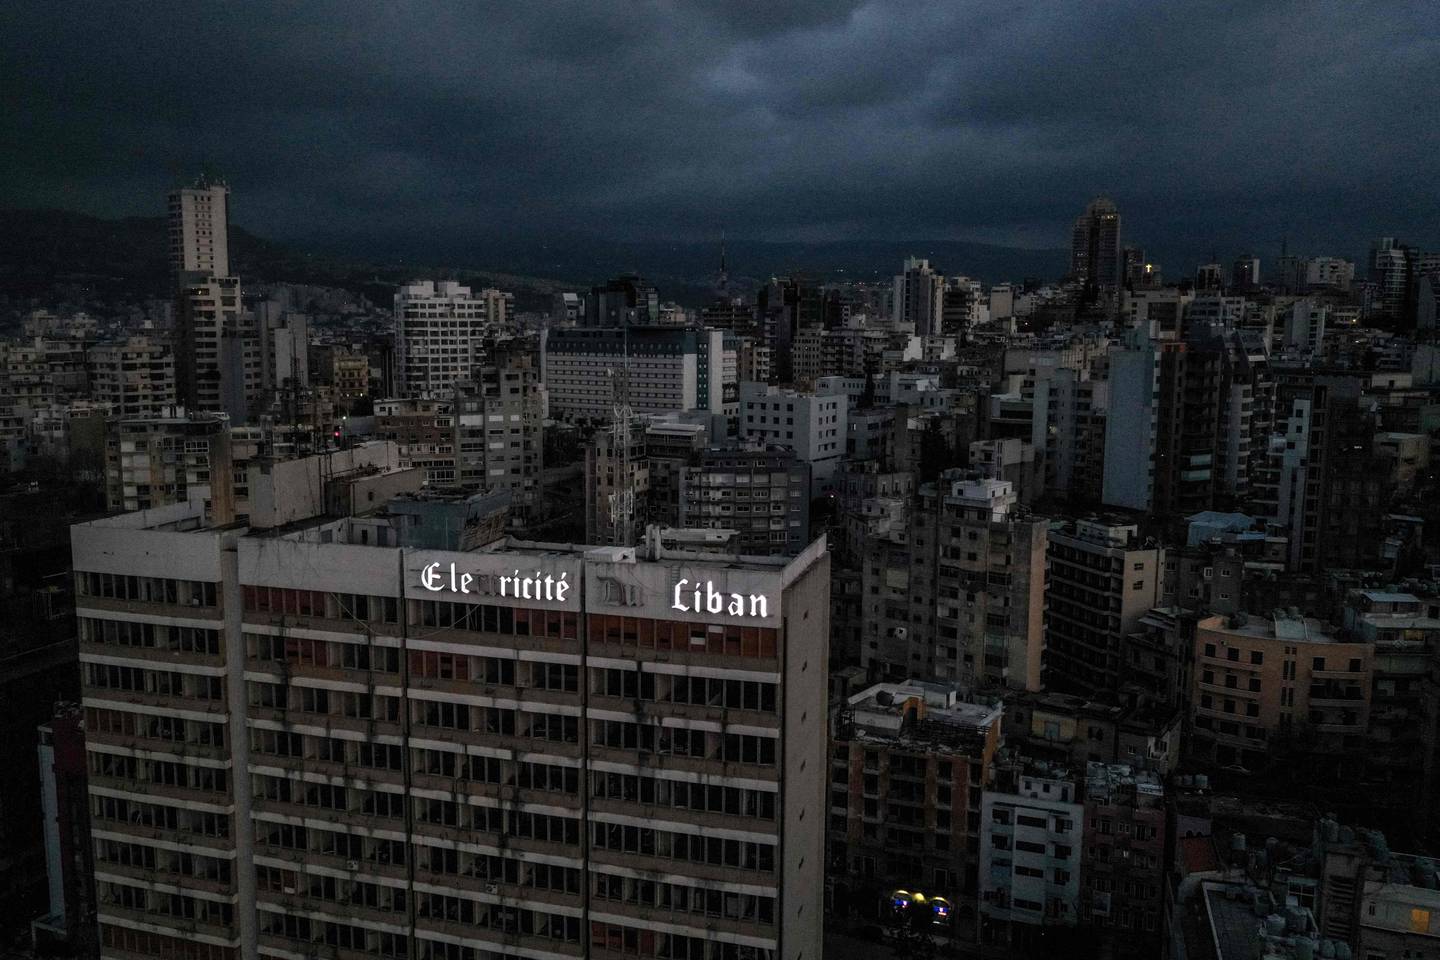 Beirut languishes in darkness during one of the Lebanese capital's chronic power cuts. Photo: AFP